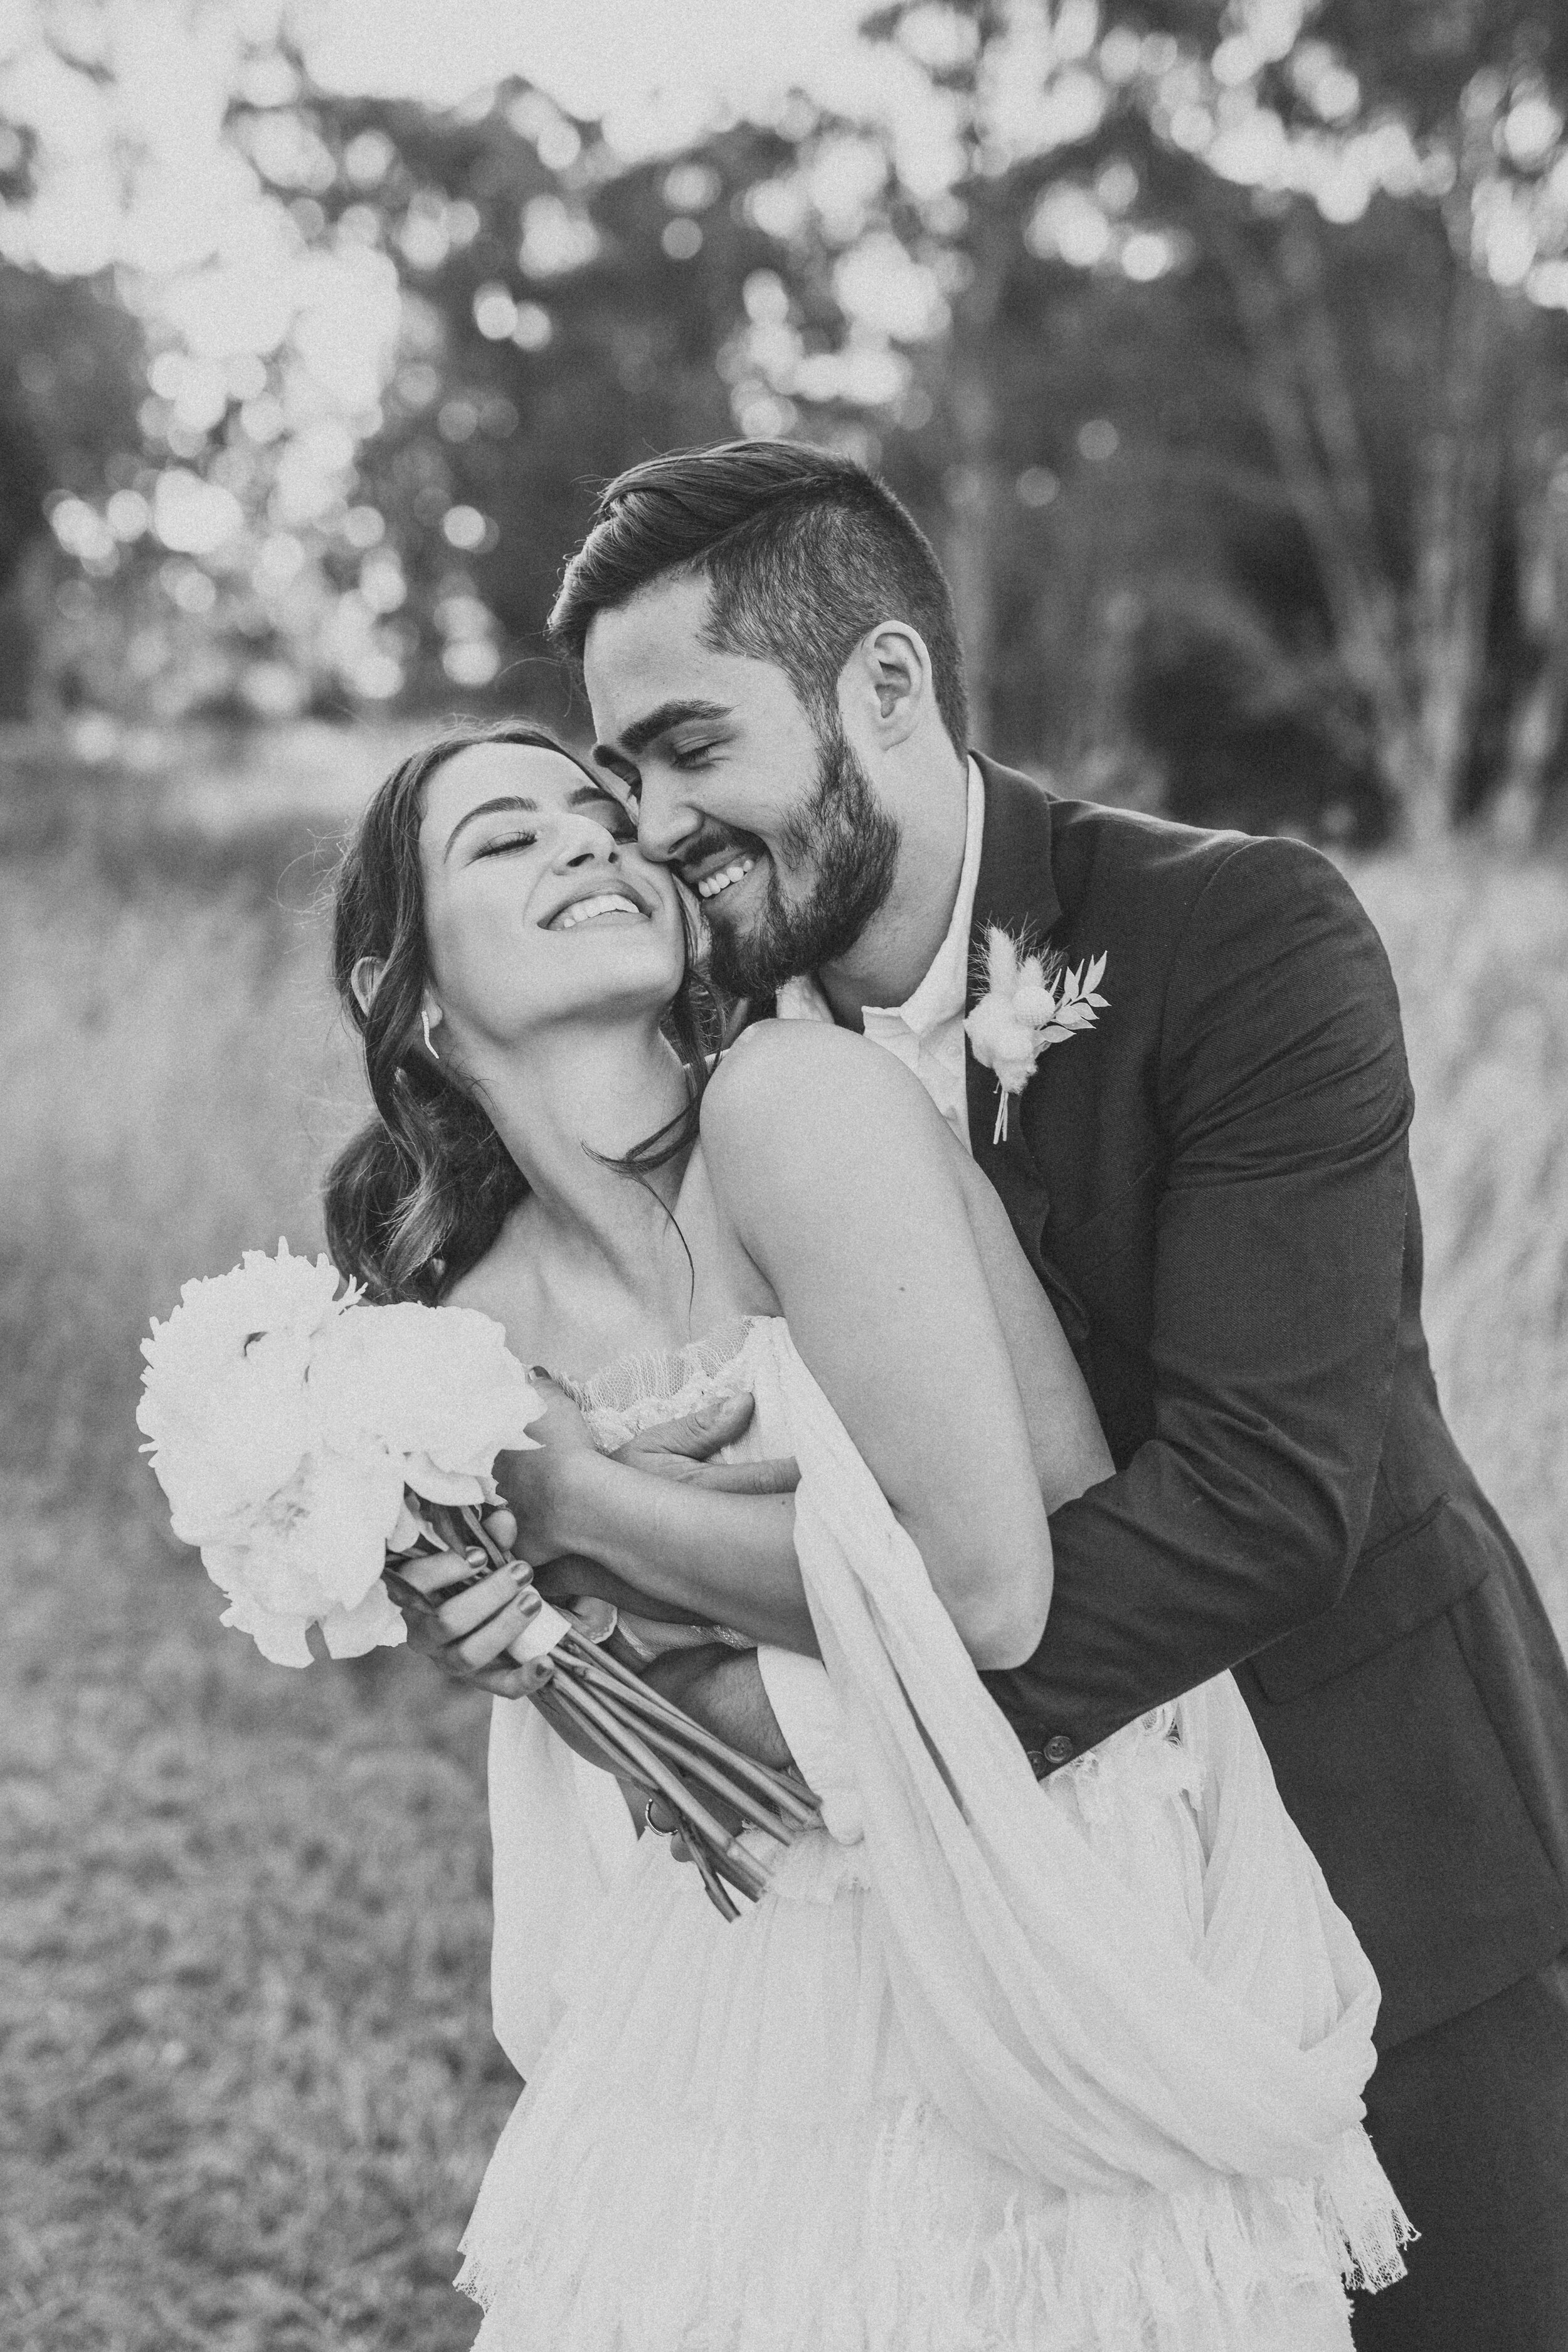 Black and white protrait of a wedding couple happily embracing each other